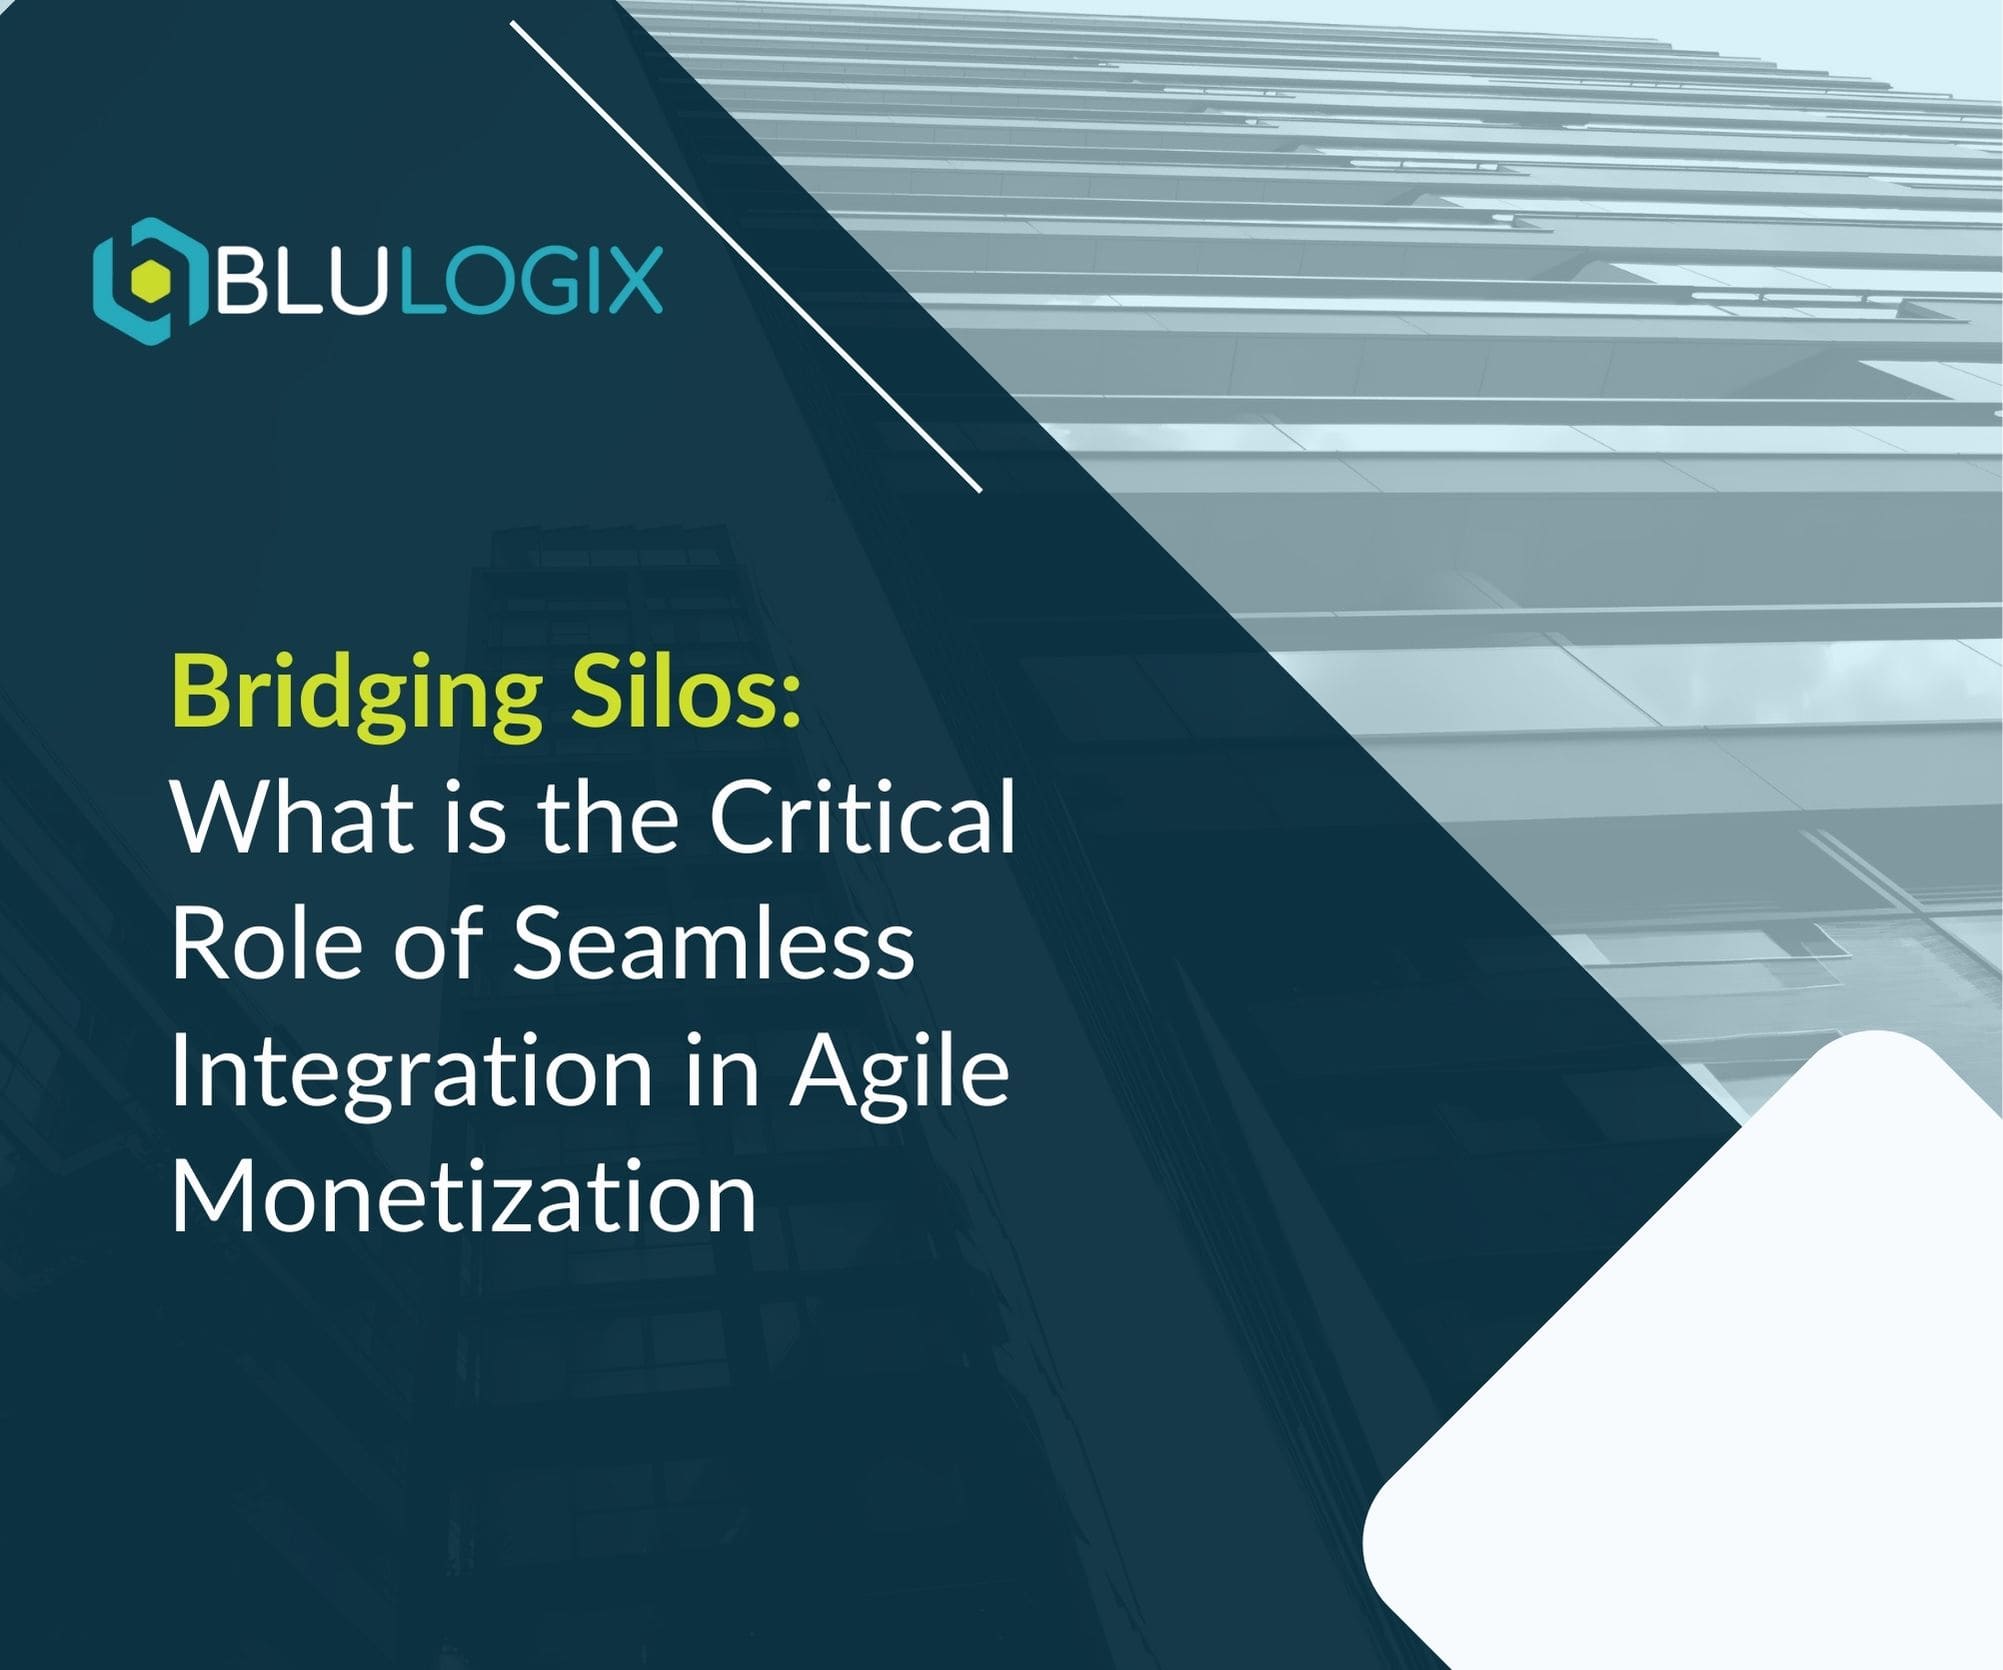 Bridging Silos What is the Critical Role of Seamless Integration in Agile Monetization